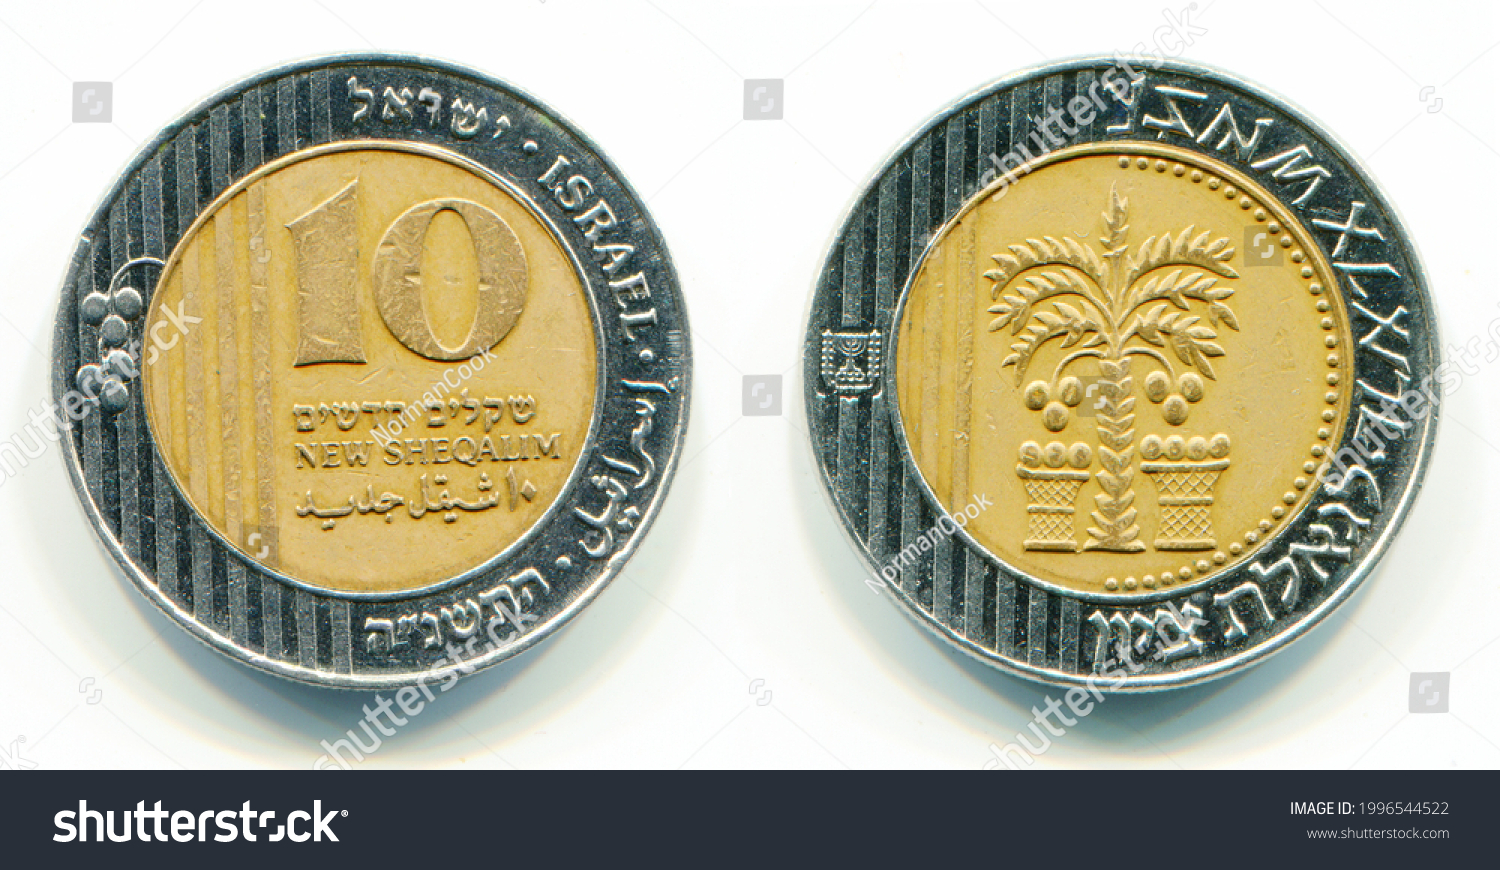 Israeli 10 New Shequalim Bimetallic coin 1995 year. The coin shows Palm tree between two baskets, Redemption of Zion, Israel #1996544522